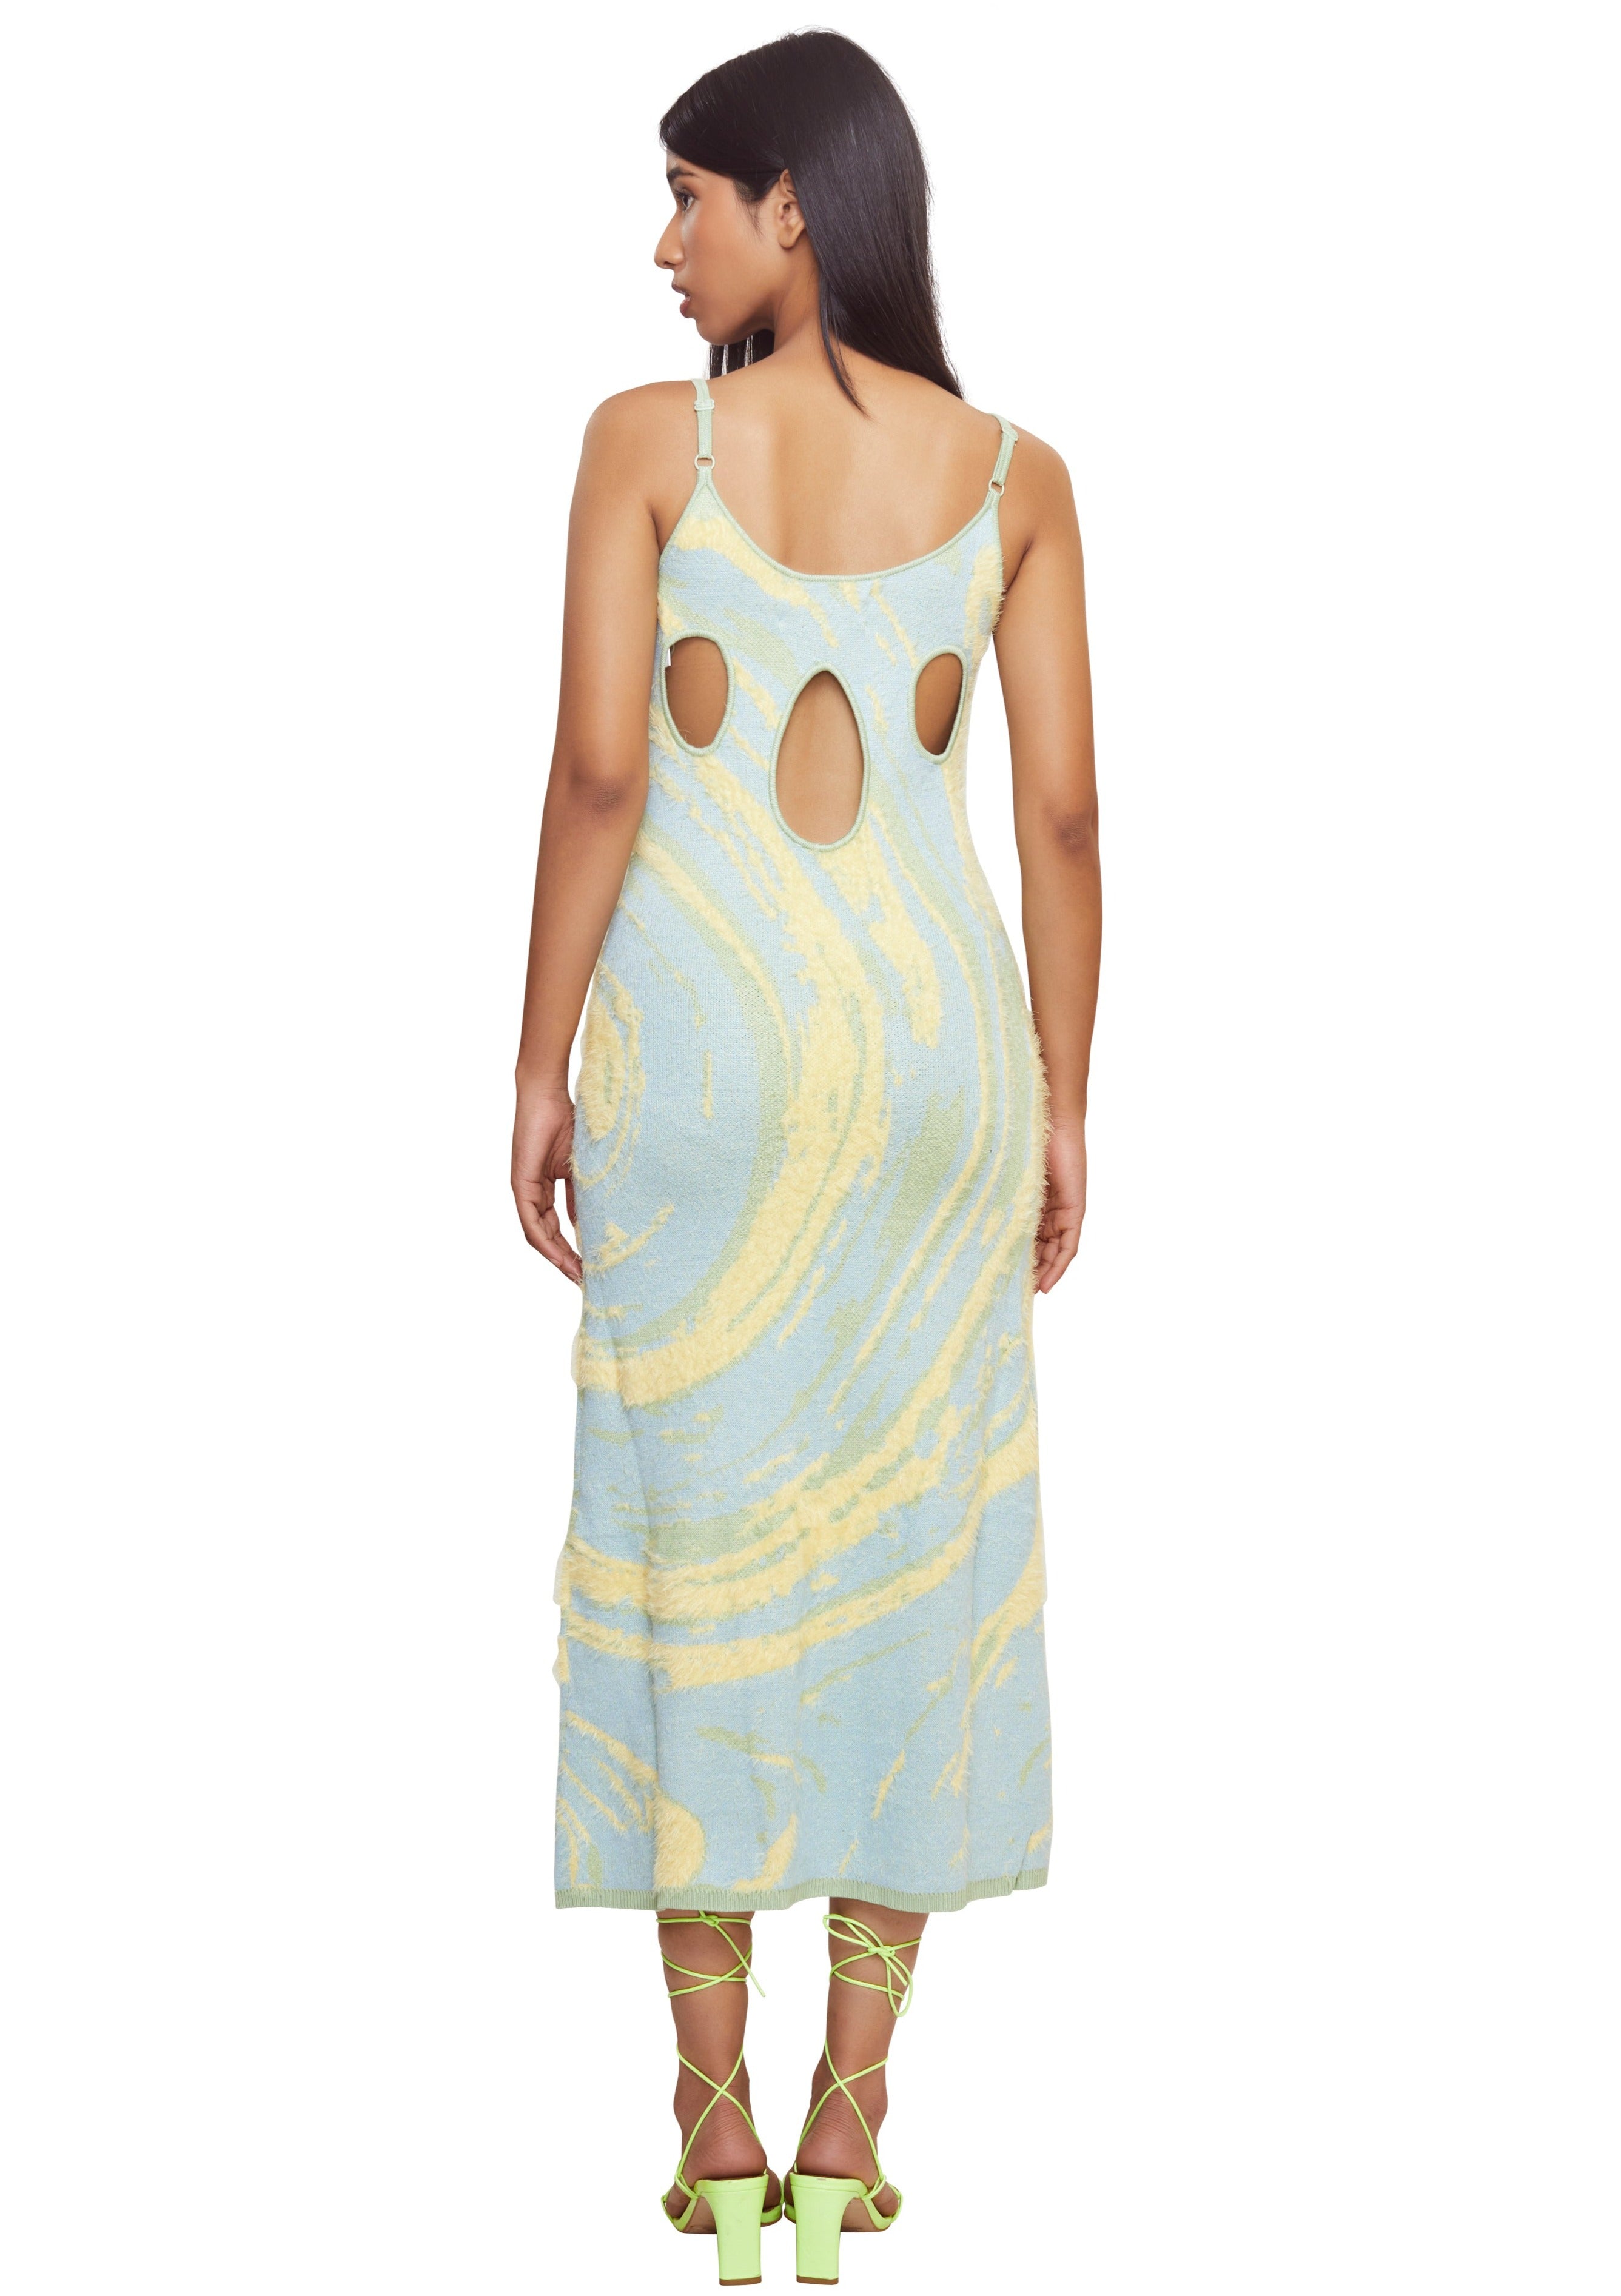 Blue and yellow clasic super soft knitted hofs slip dress w/ swirl print inspired by a beautiful beach from the brand House Of Sunny